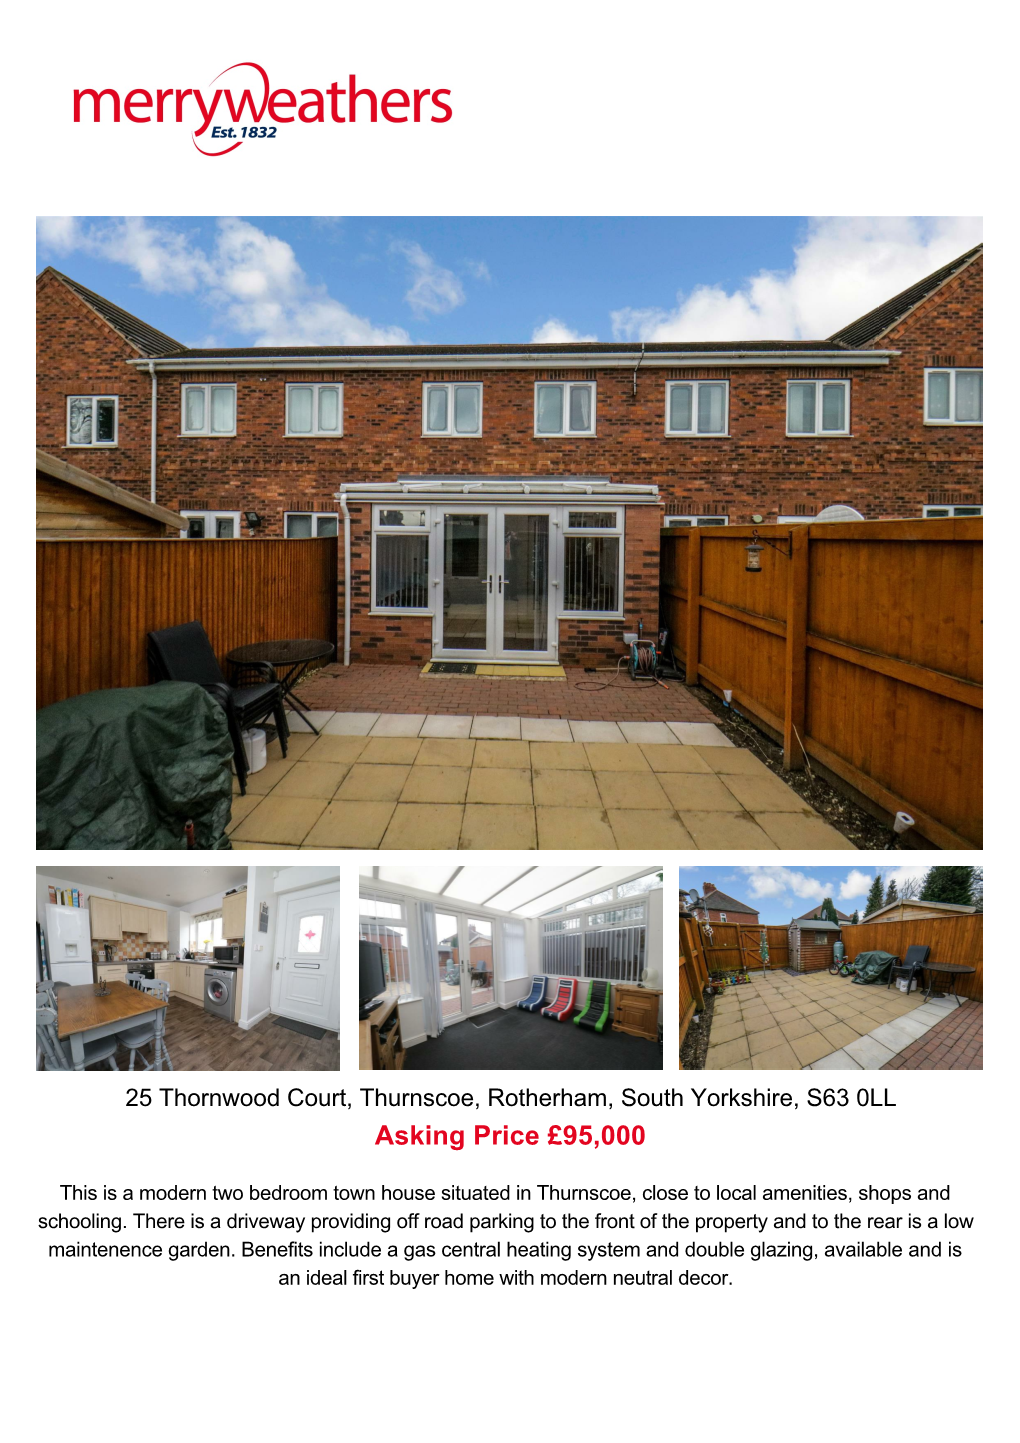 Thornwood Court, Thurnscoe, Rotherham, South Yorkshire, S63 0LL Asking Price £95,000